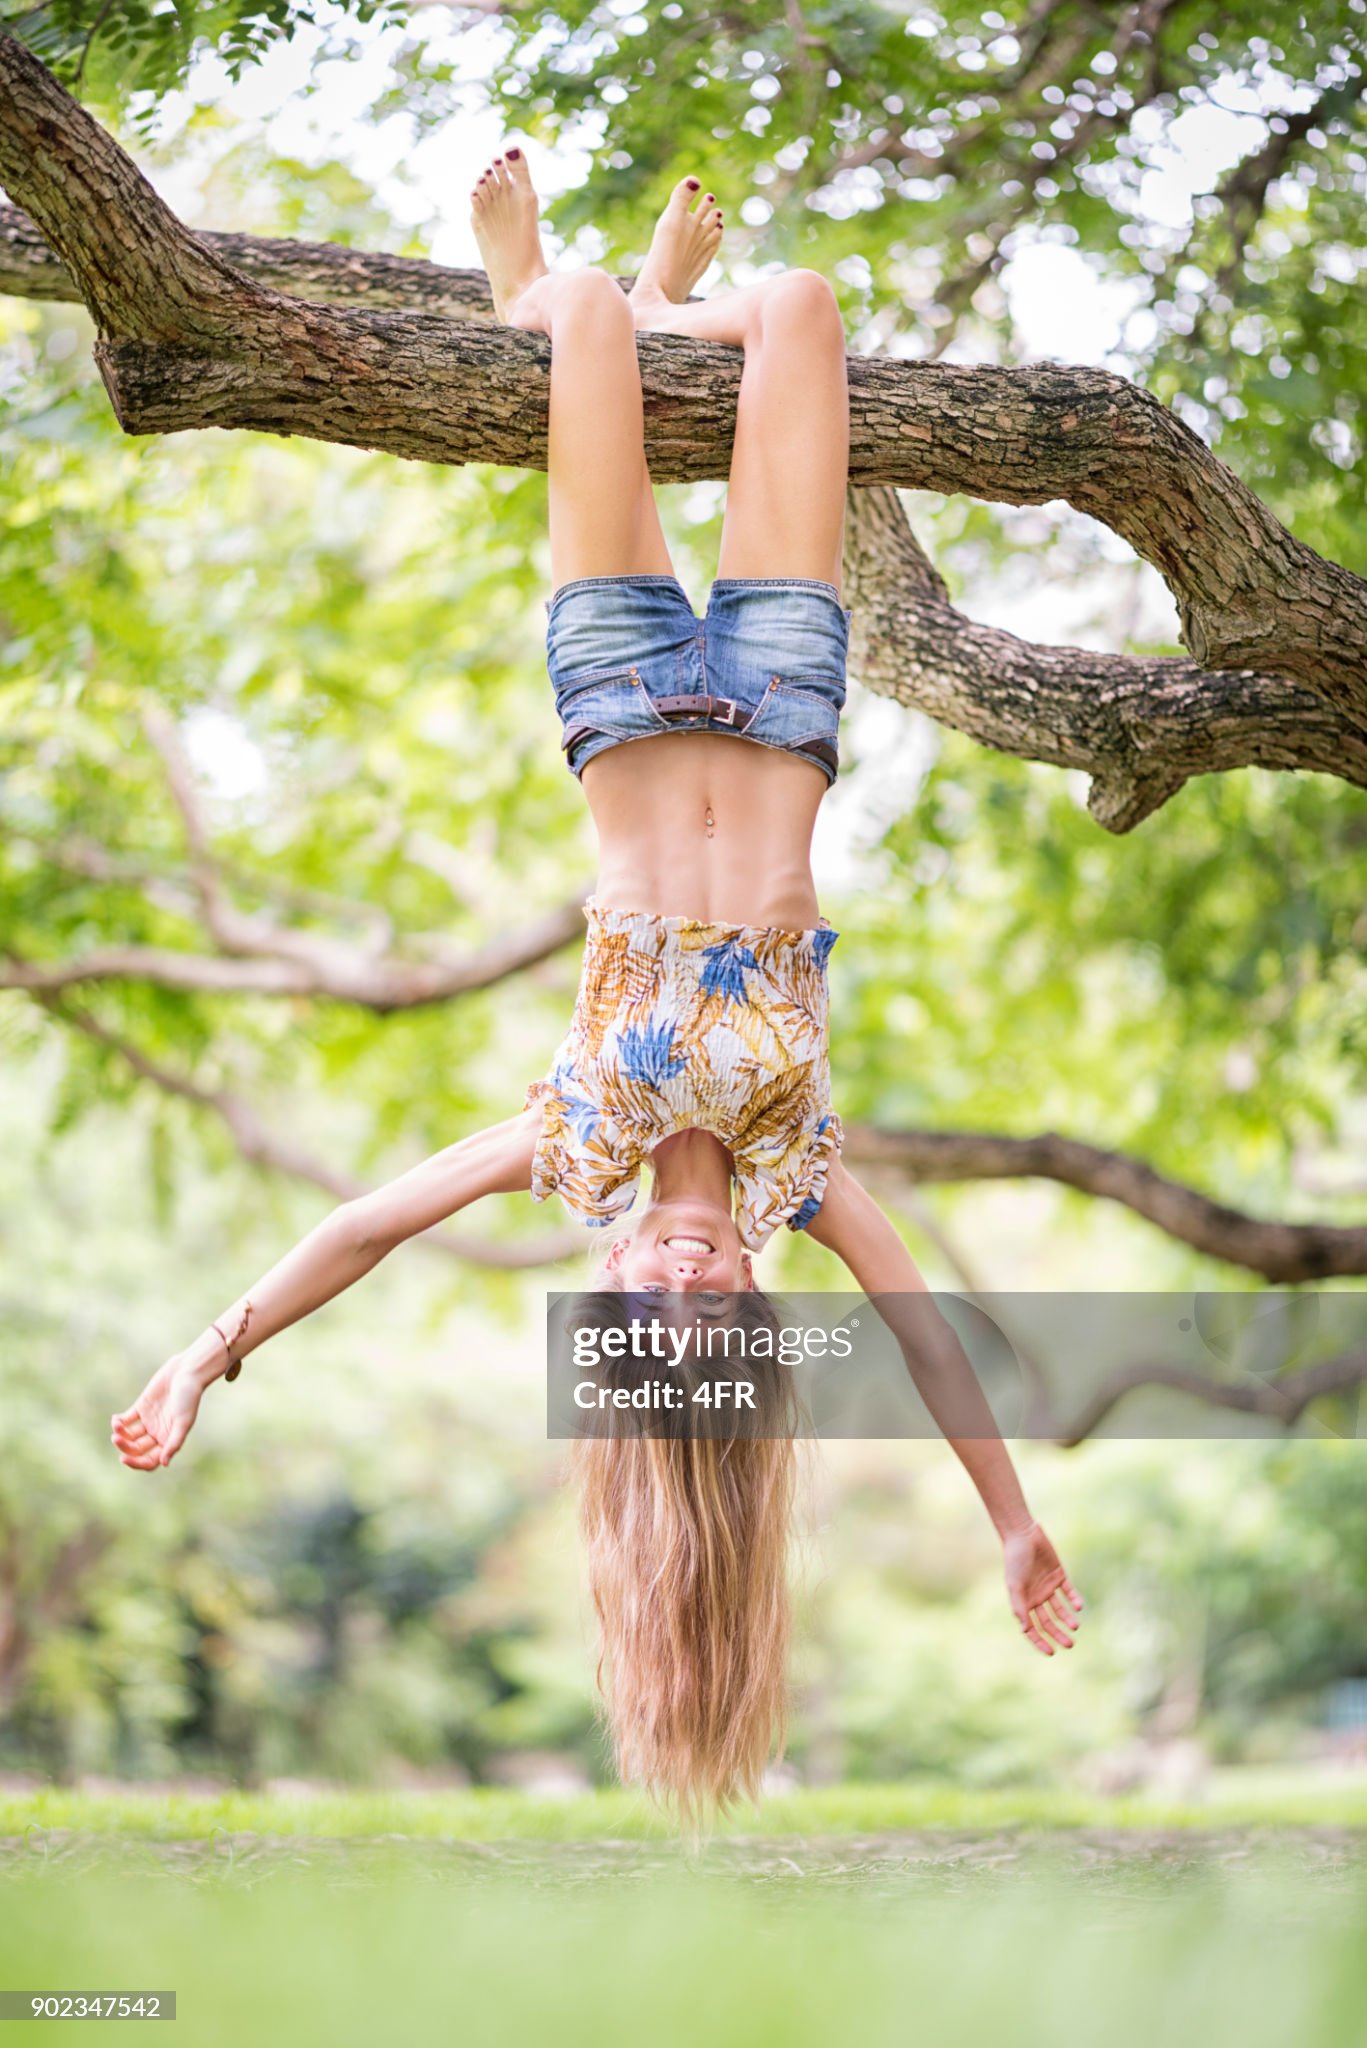 https://media.gettyimages.com/id/902347542/photo/beautiful-woman-hanging-upside-down-from-a-huge-tree-branch-enjoying-nature.jpg?s=2048x2048&amp;w=gi&amp;k=20&amp;c=6XuxK2uAdyZswLvPVChYWX26S1T7jfLyzWN9CpN7X28=